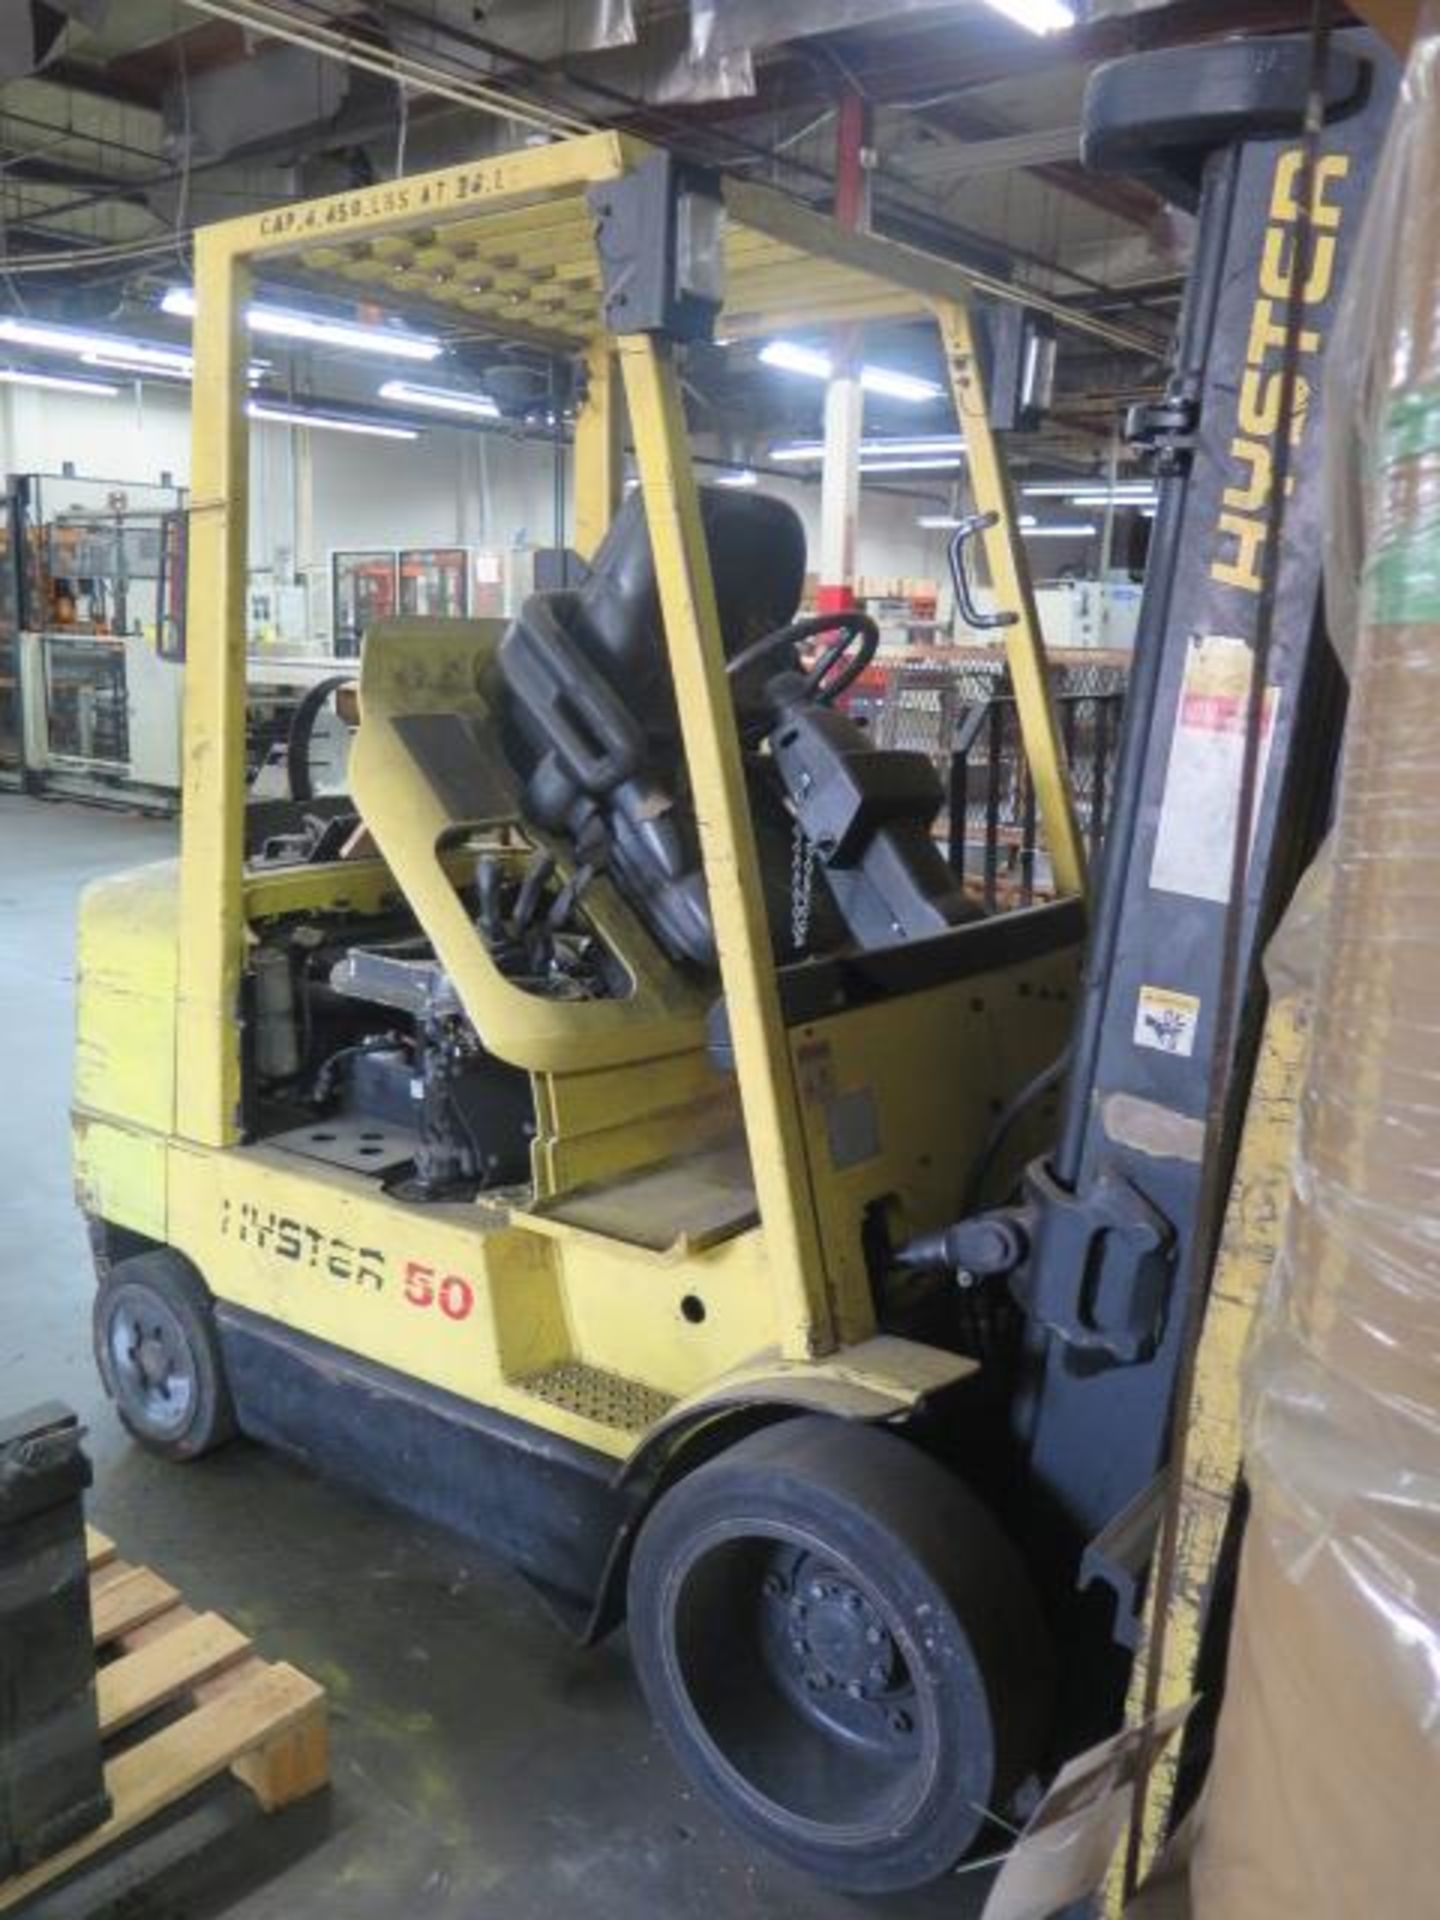 Hyster 50 5000 Lb Cap LPG Forklift (NEEDS REPAIR) w/ 3-Stage, Side Shift, Cushion Tires, SOLD AS IS - Image 2 of 13